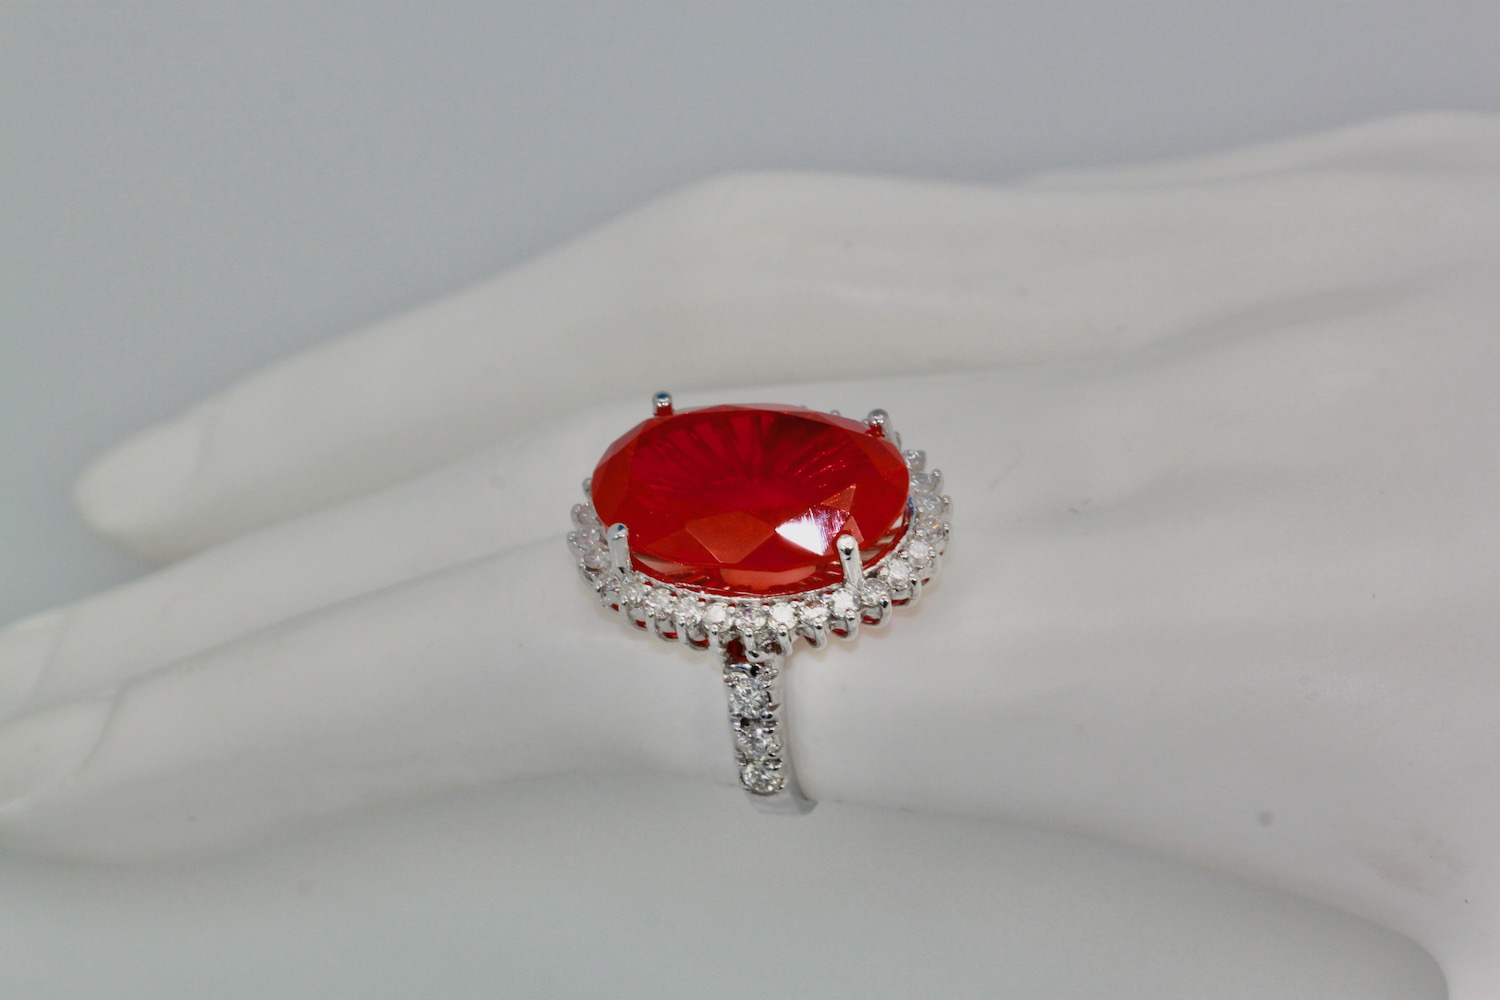 Large Fire Opal ring with Diamond surround – model close